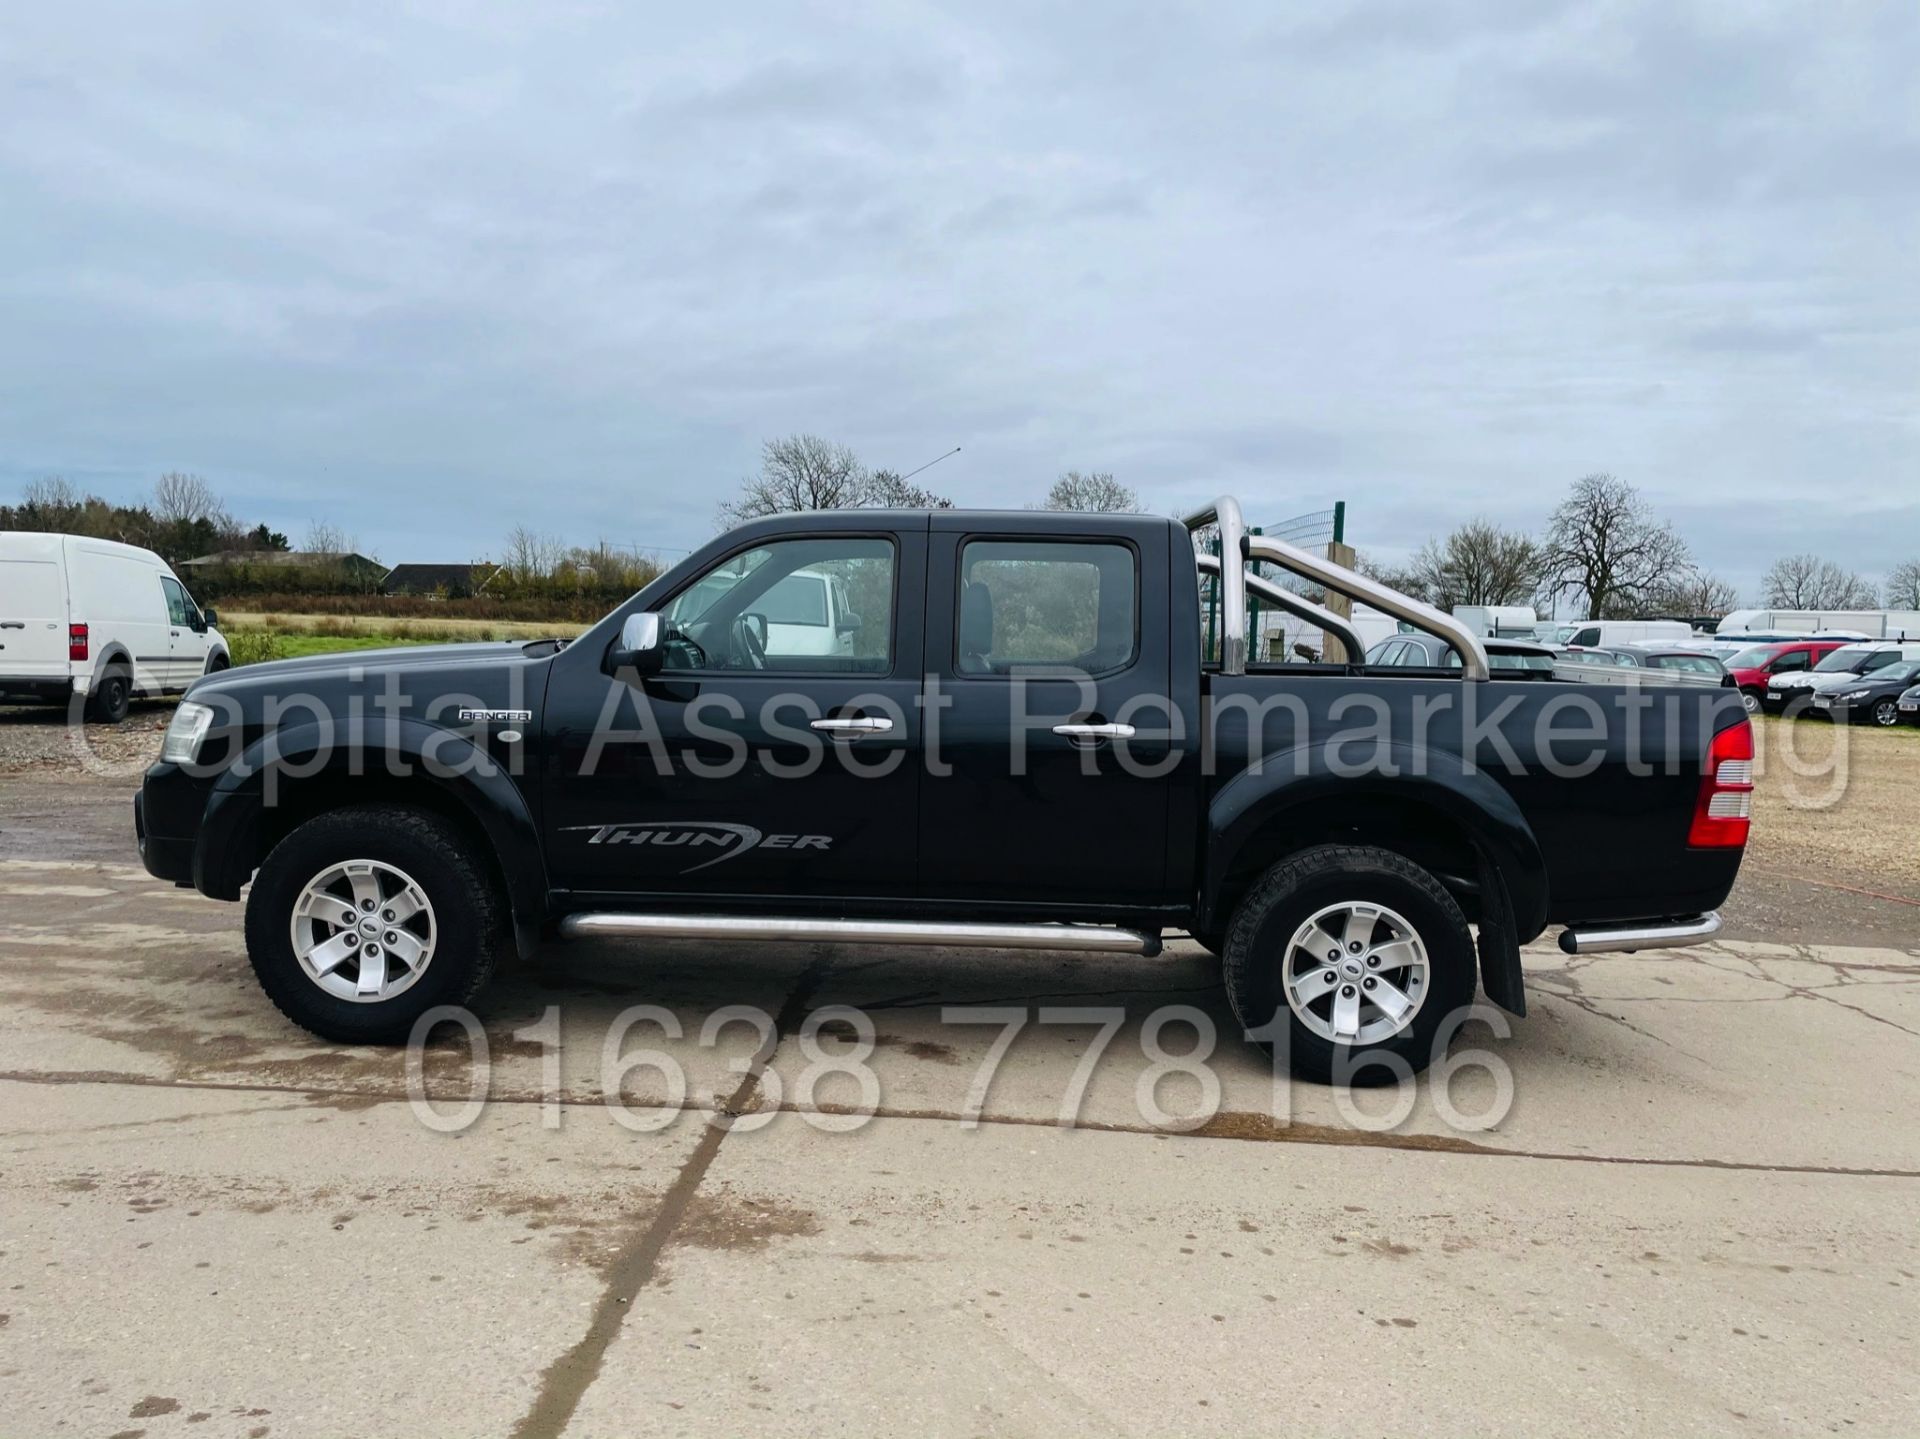 ON SALE FORD RANGER *THUNDER* DOUBLE CAB 4X4 PICK-UP (2009) '2.5 TDCI - 1 *LEATHER - A/C* (NO VAT) - Image 8 of 40